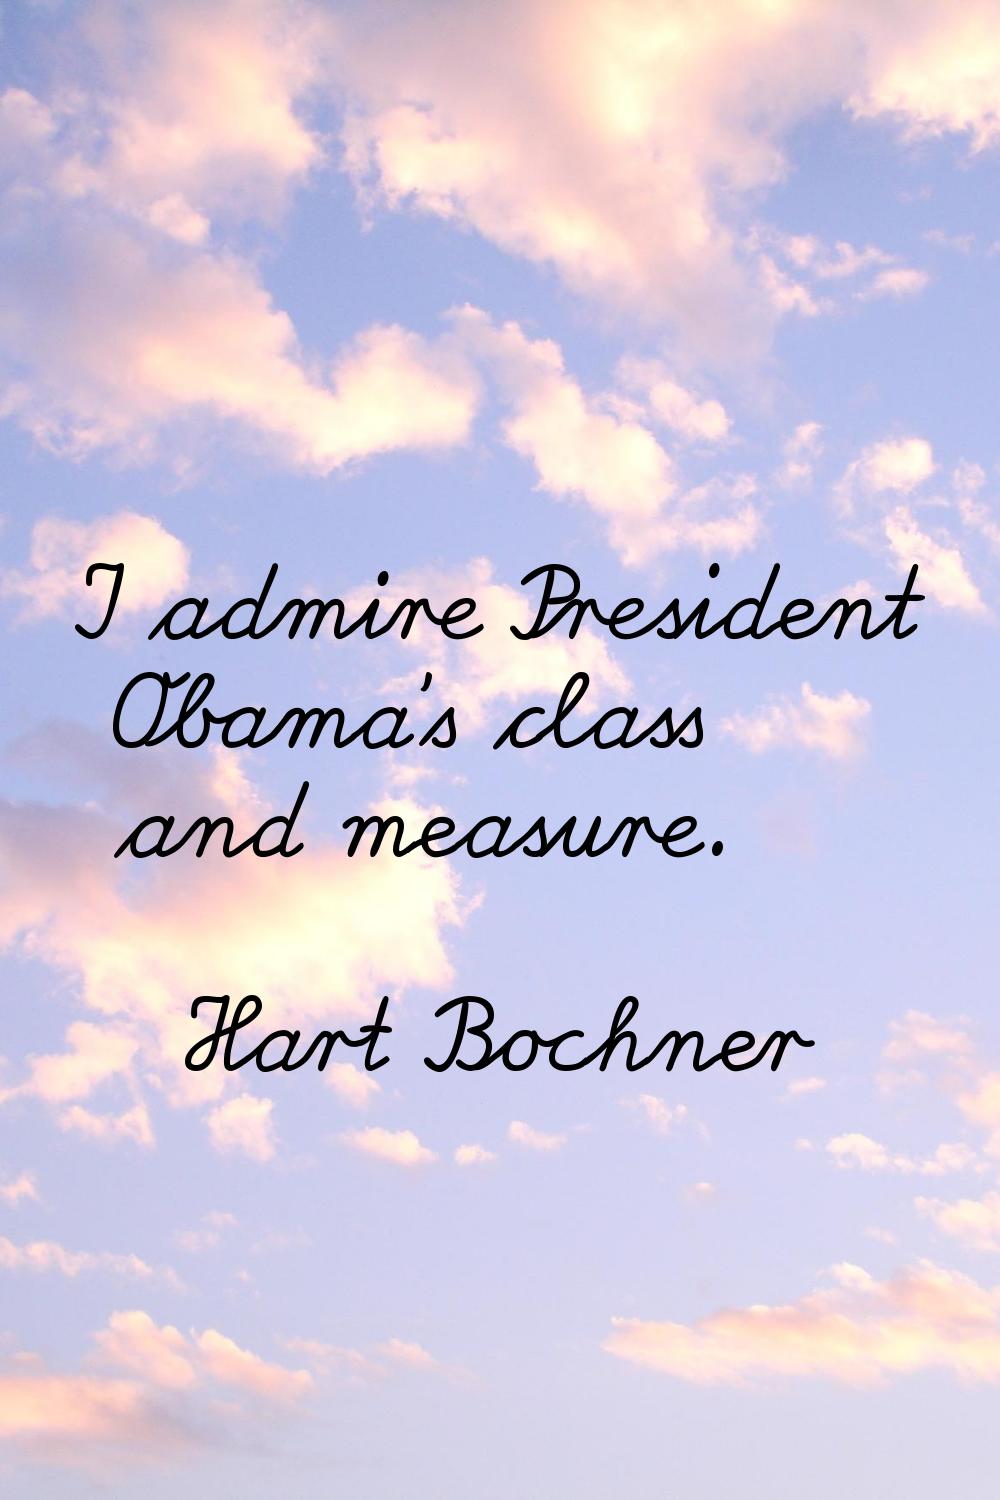 I admire President Obama's class and measure.